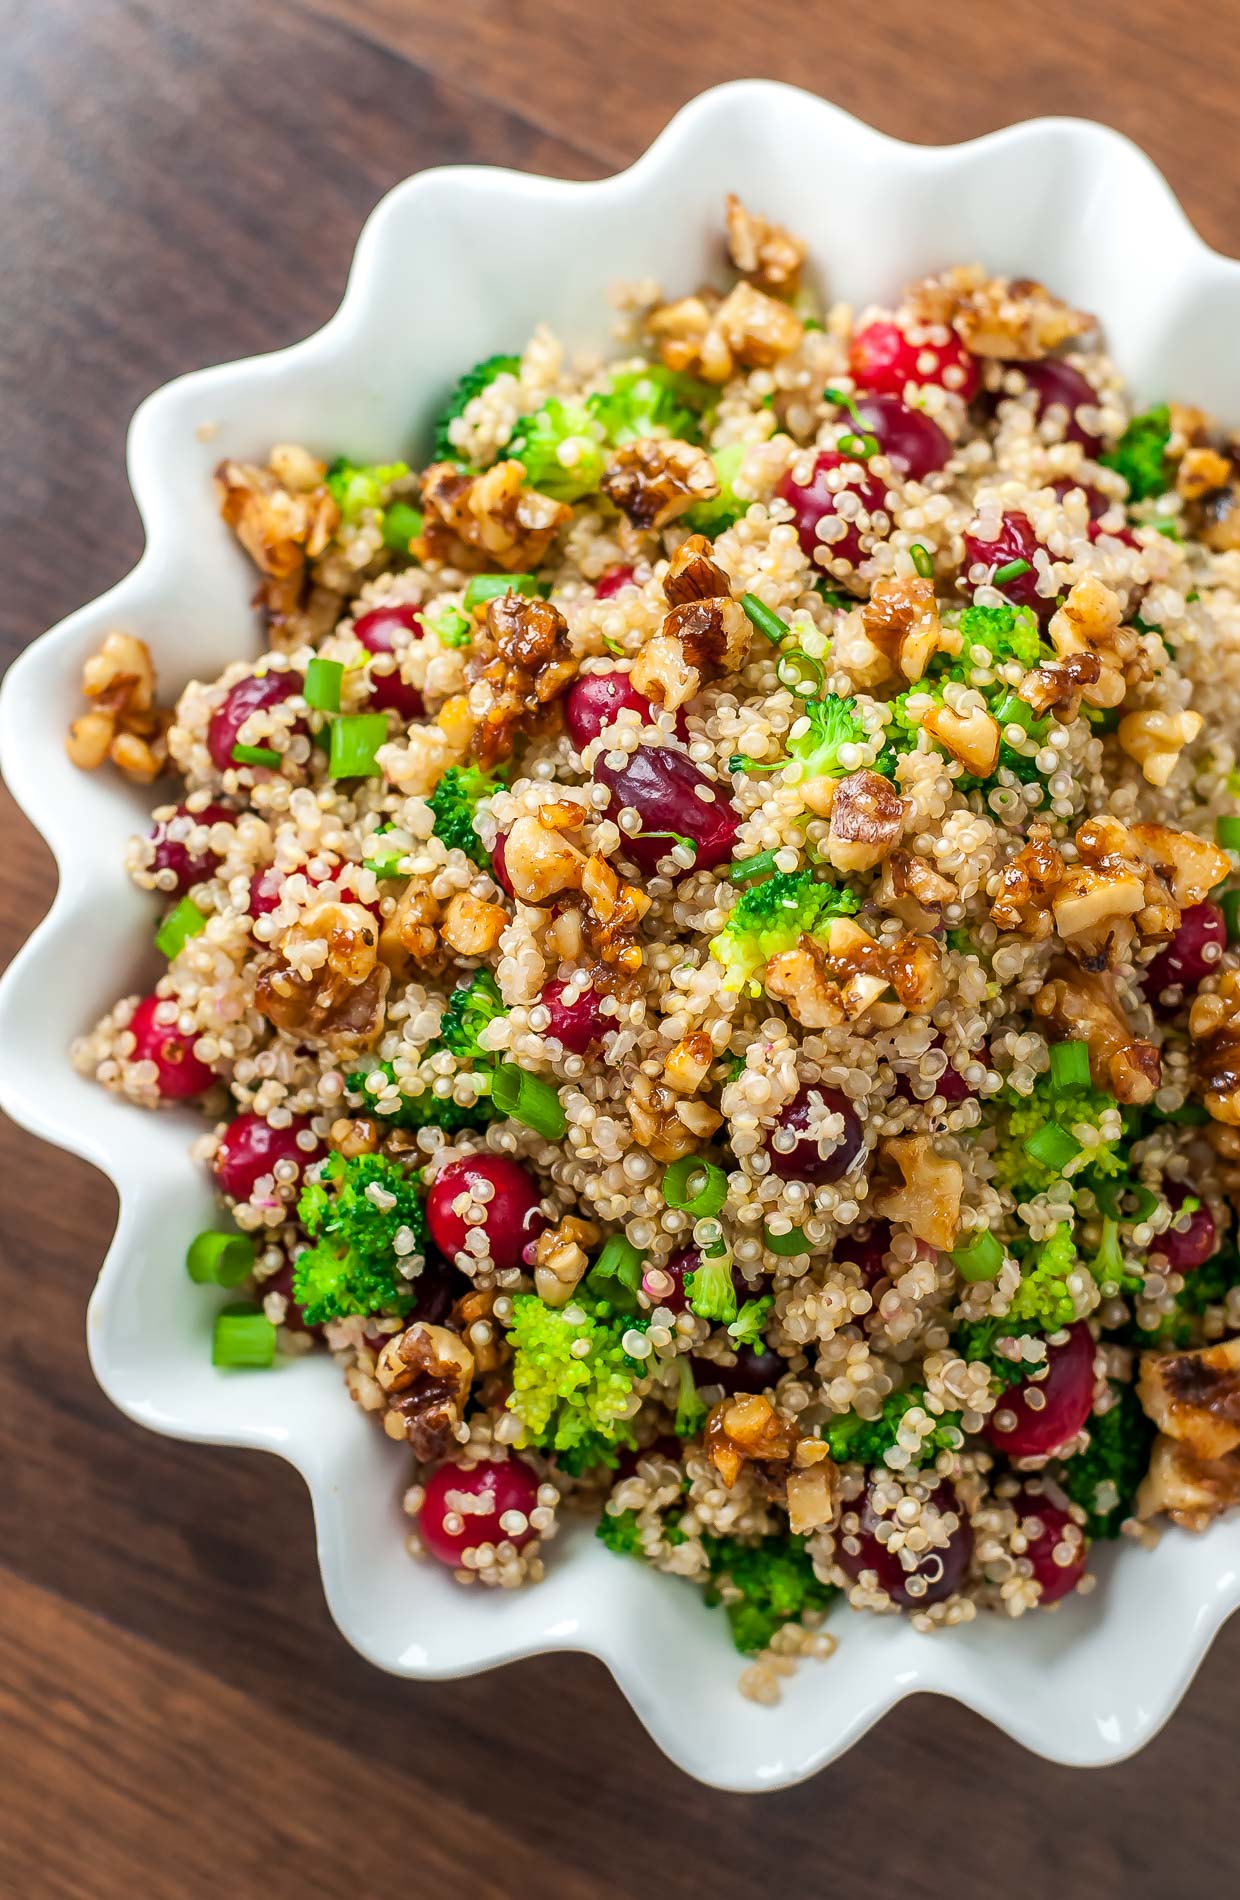 This Healthy Cranberry Quinoa Salad is gluten-free and totally tasty! #healthy #glutenfree #quinoa #salad